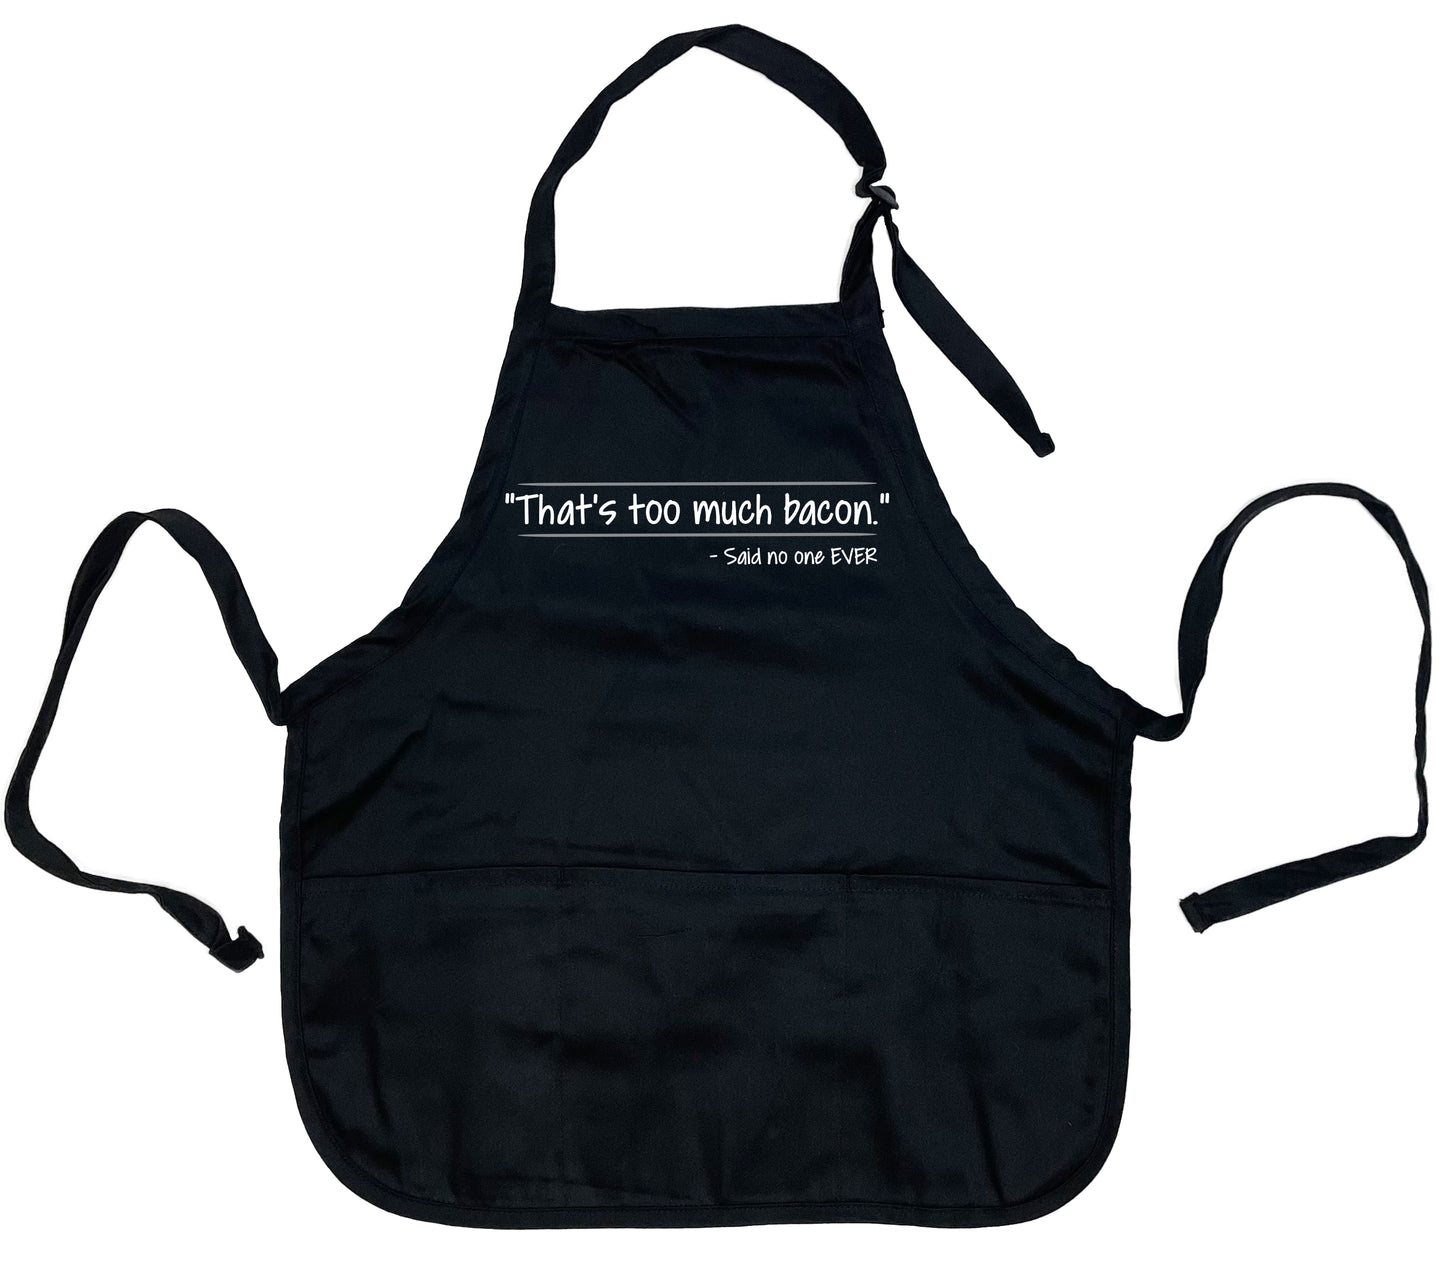 "Thatâ€™s Too Much Bacon" Said No One Ever Apron